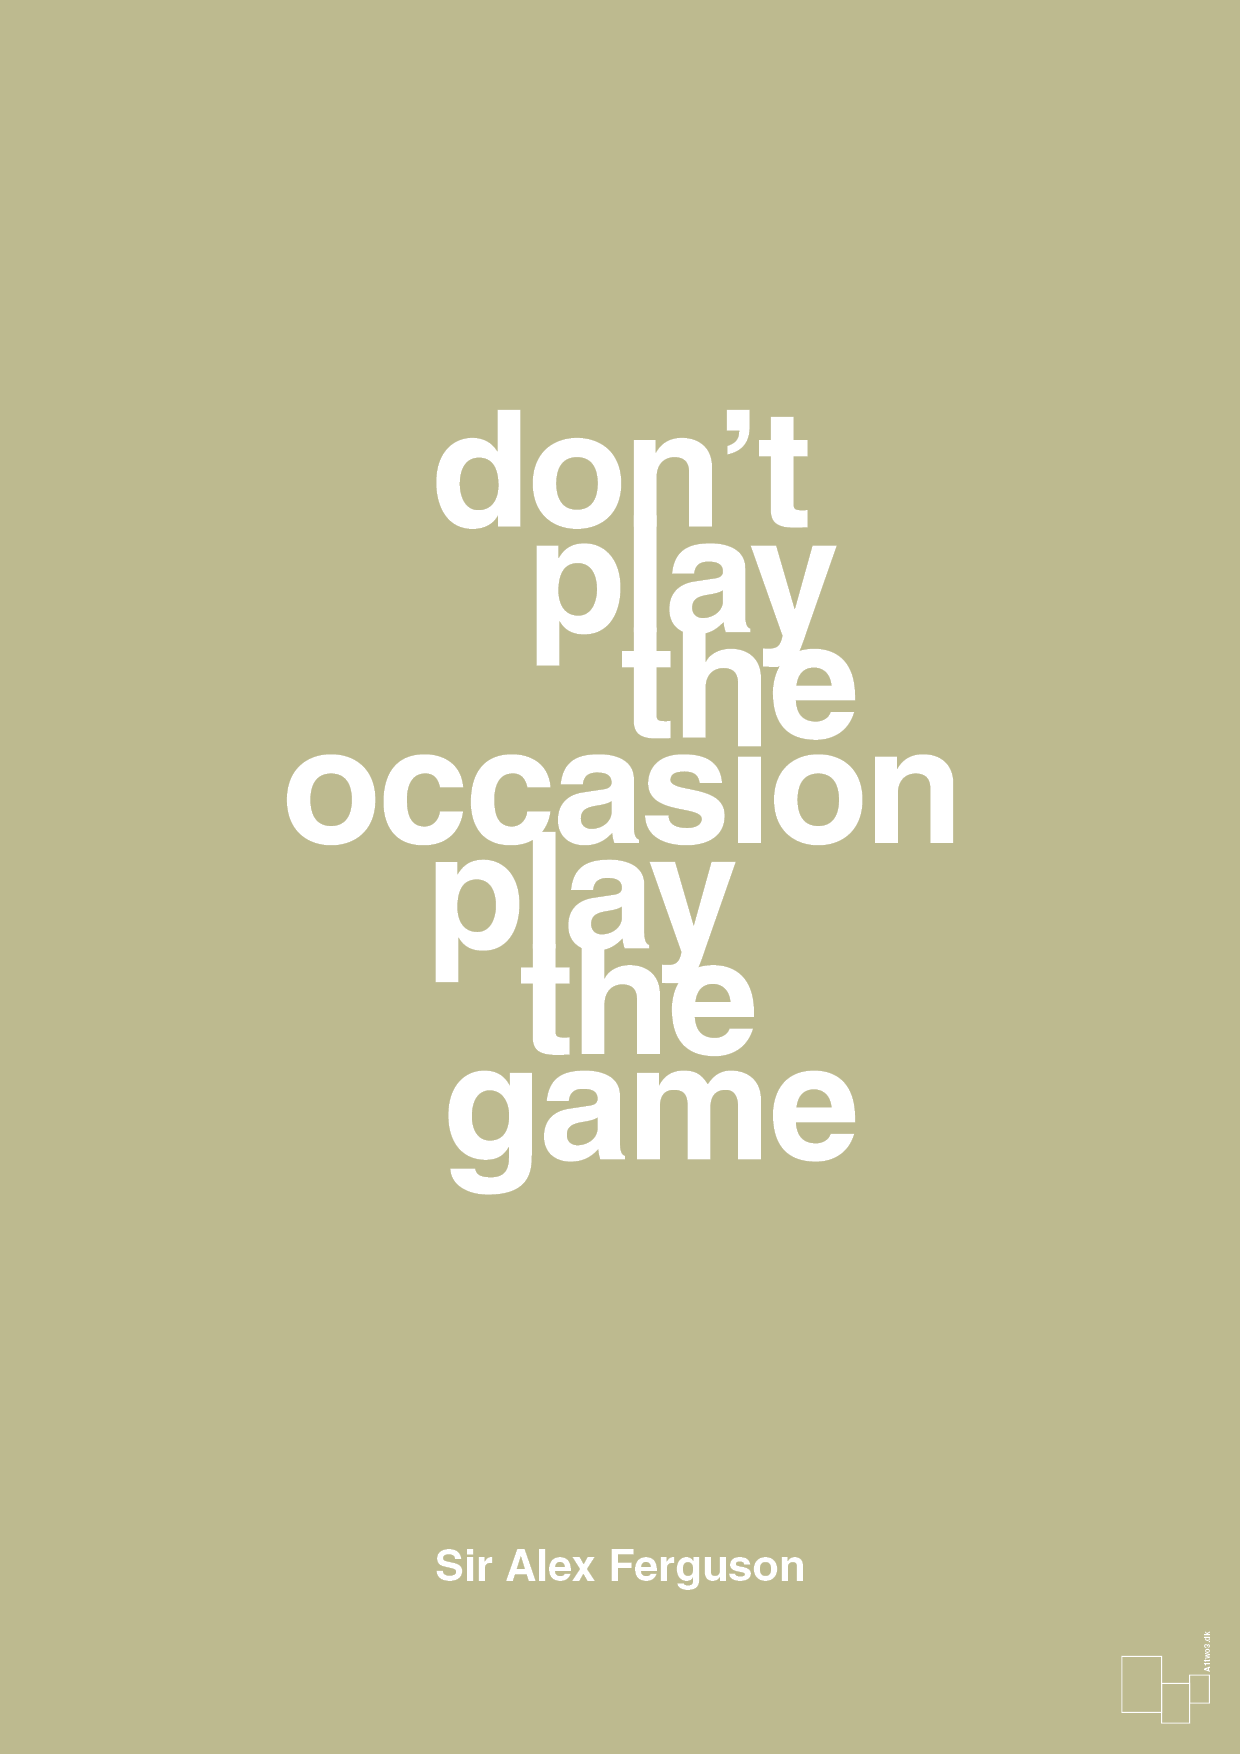 don’t play the occasion play the game - Plakat med Citater i Back to Nature